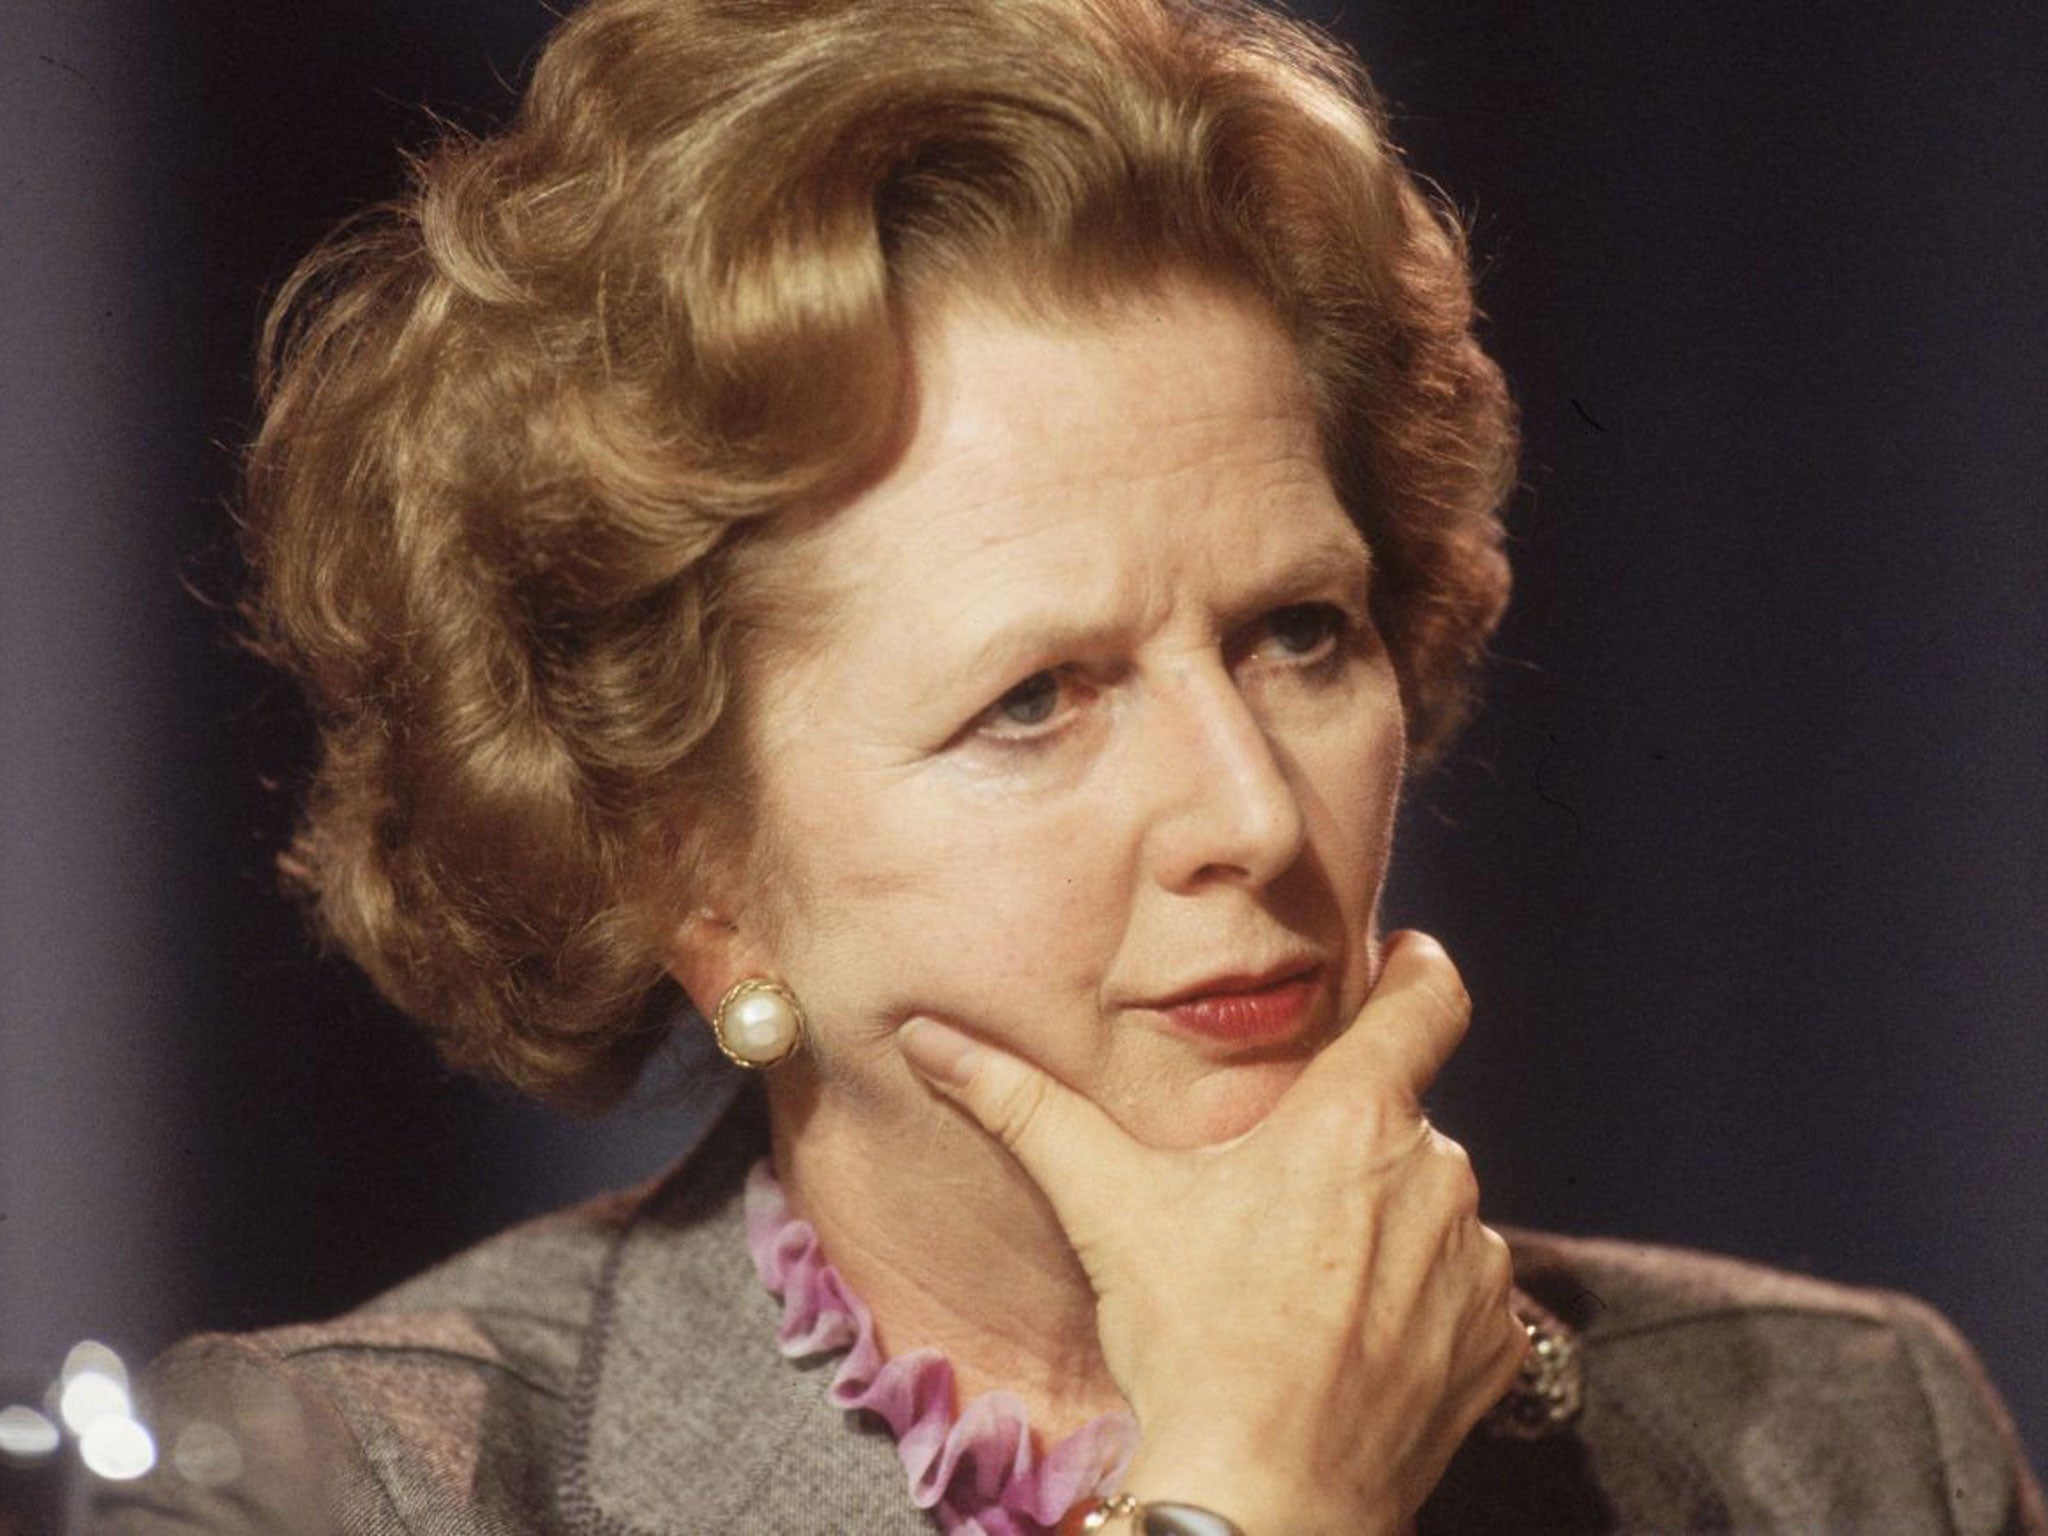 Margaret Thatcher, who was British Prime Minister from 1979 to 1990, died in 2013